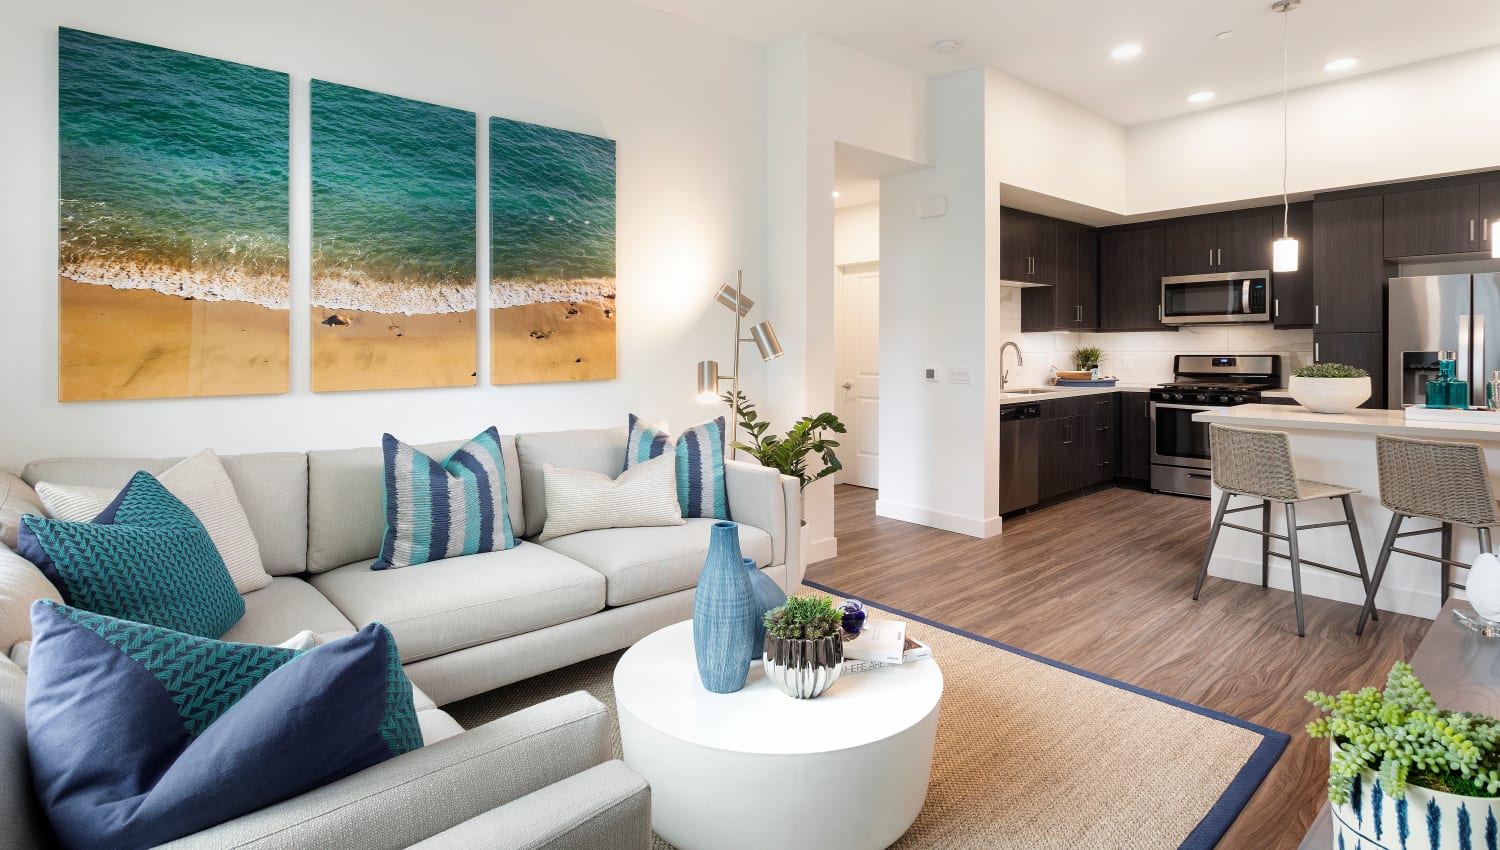 Model living space with ocean-style decoration at The Residences at Escaya in Chula Vista, California